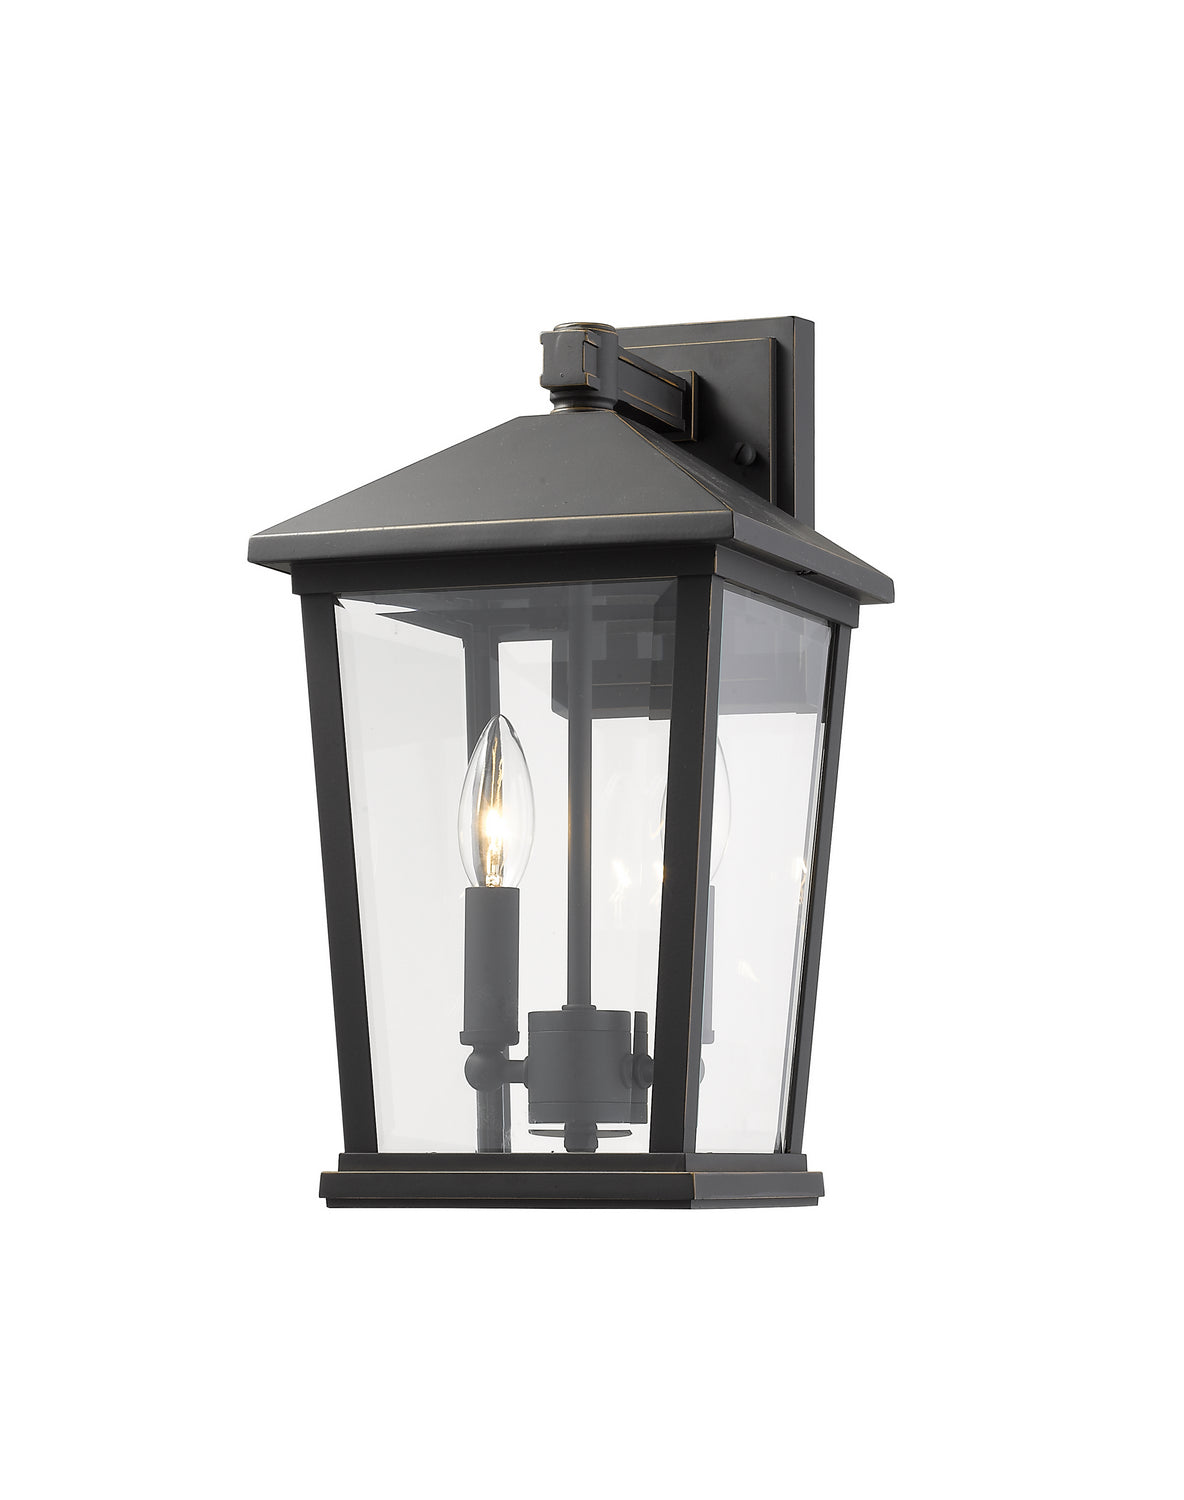 Z-Lite Canada - Two Light Outdoor Wall Sconce - Beacon - Oil Rubbed Bronze- Union Lighting Luminaires Decor